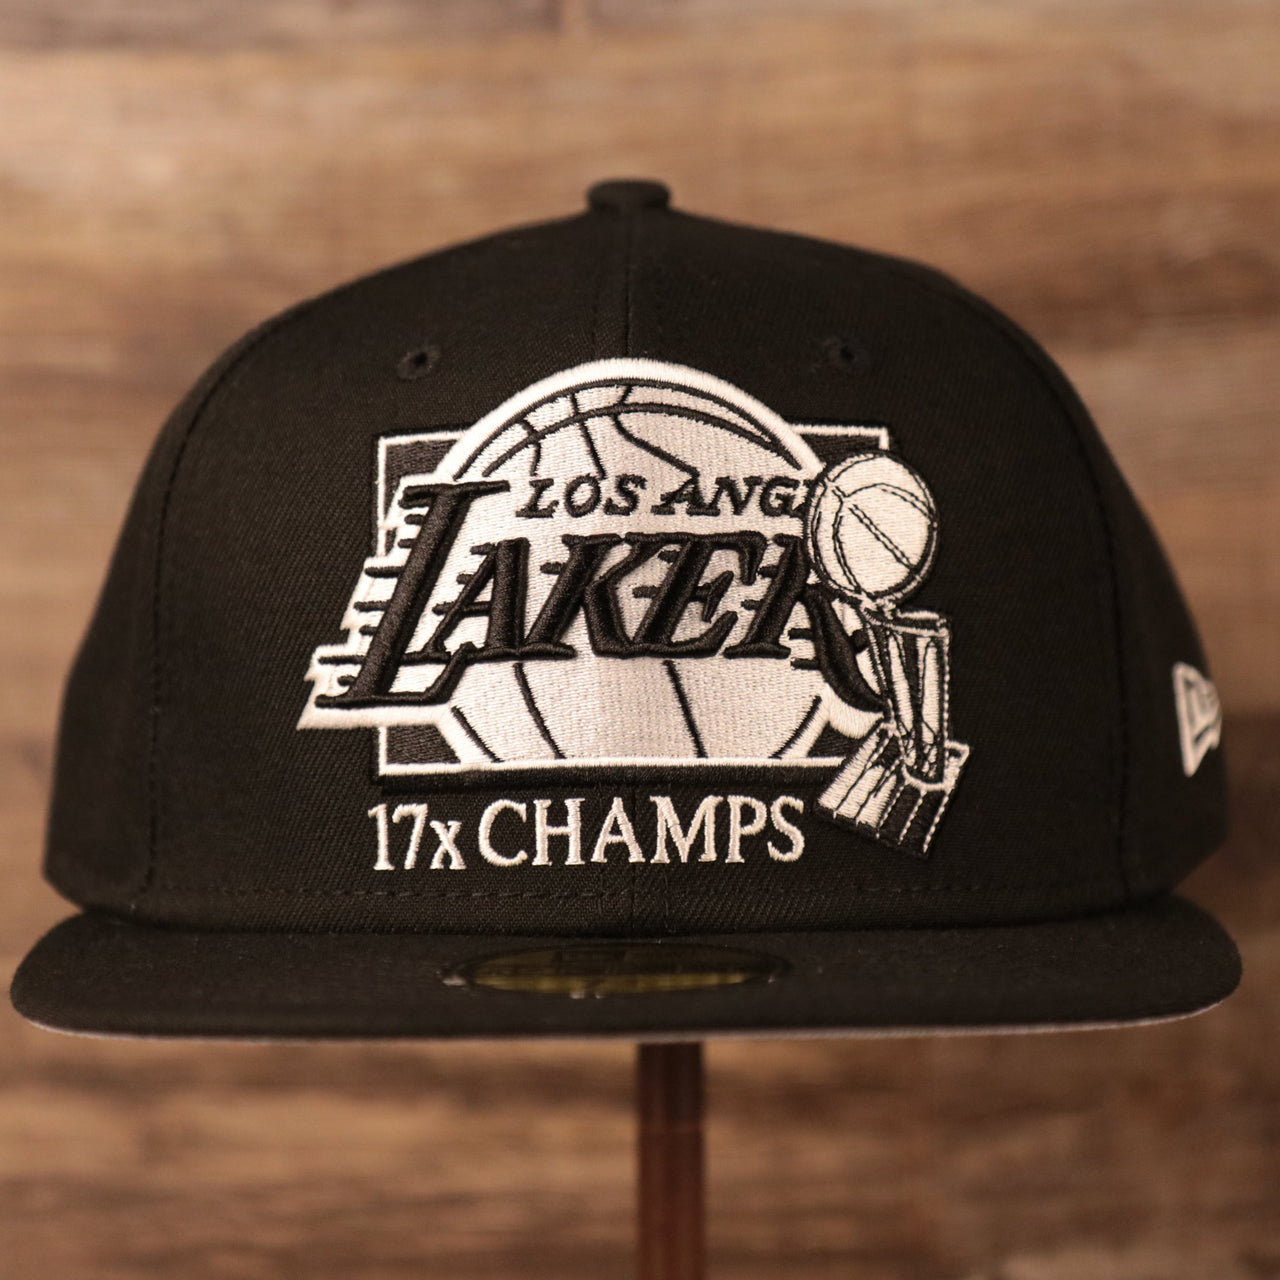 The black Los Angeles Lakers 17x champs hat with grey bottom.